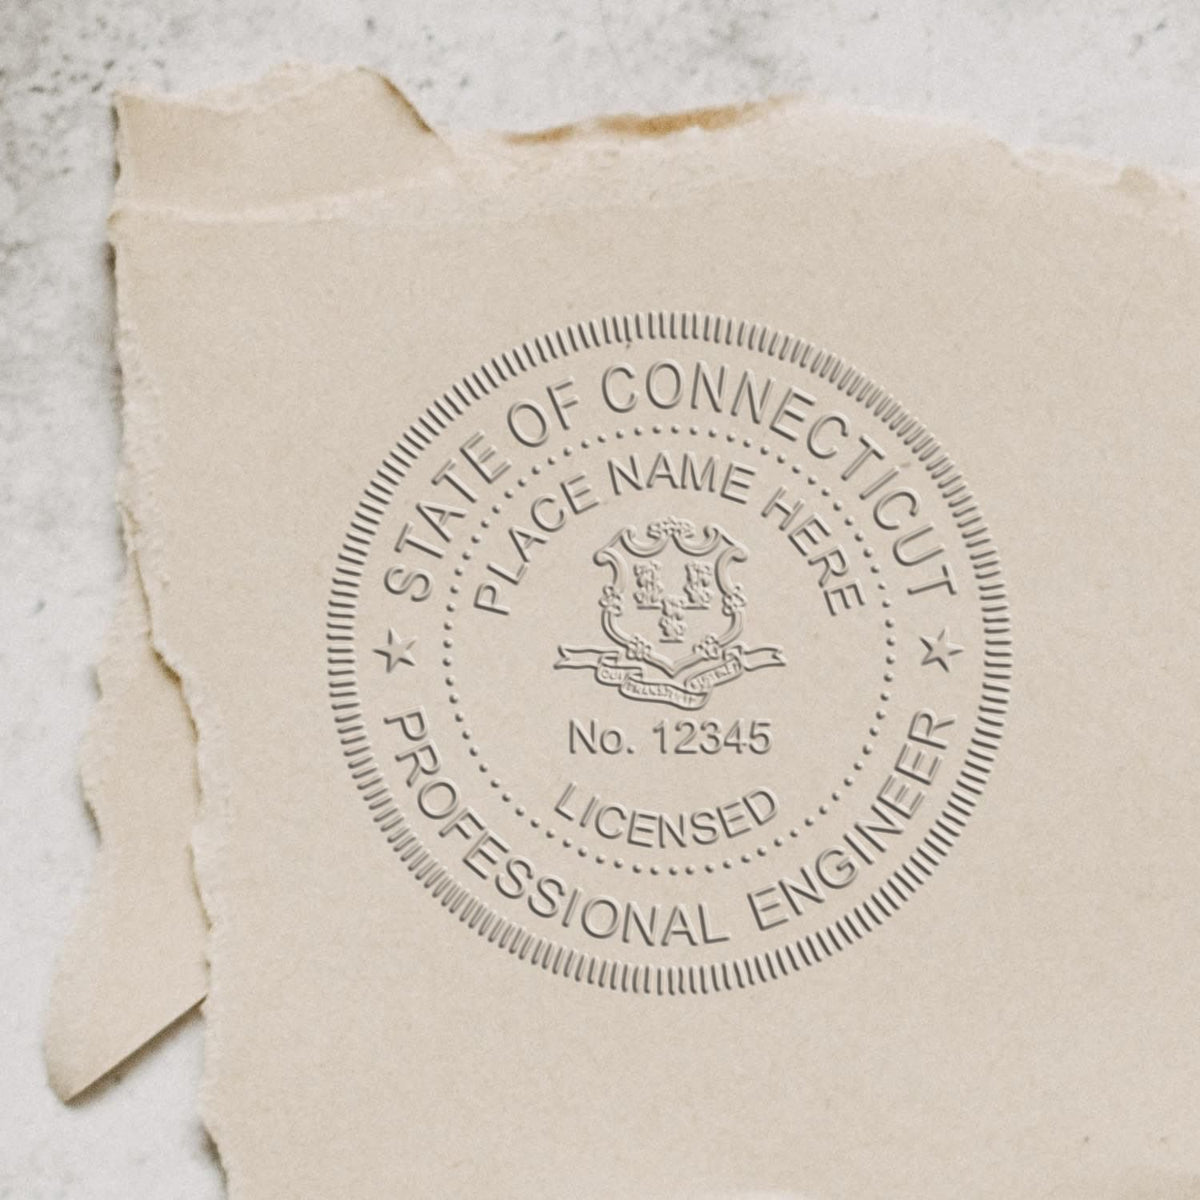 A stamped impression of the Long Reach Connecticut PE Seal in this stylish lifestyle photo, setting the tone for a unique and personalized product.